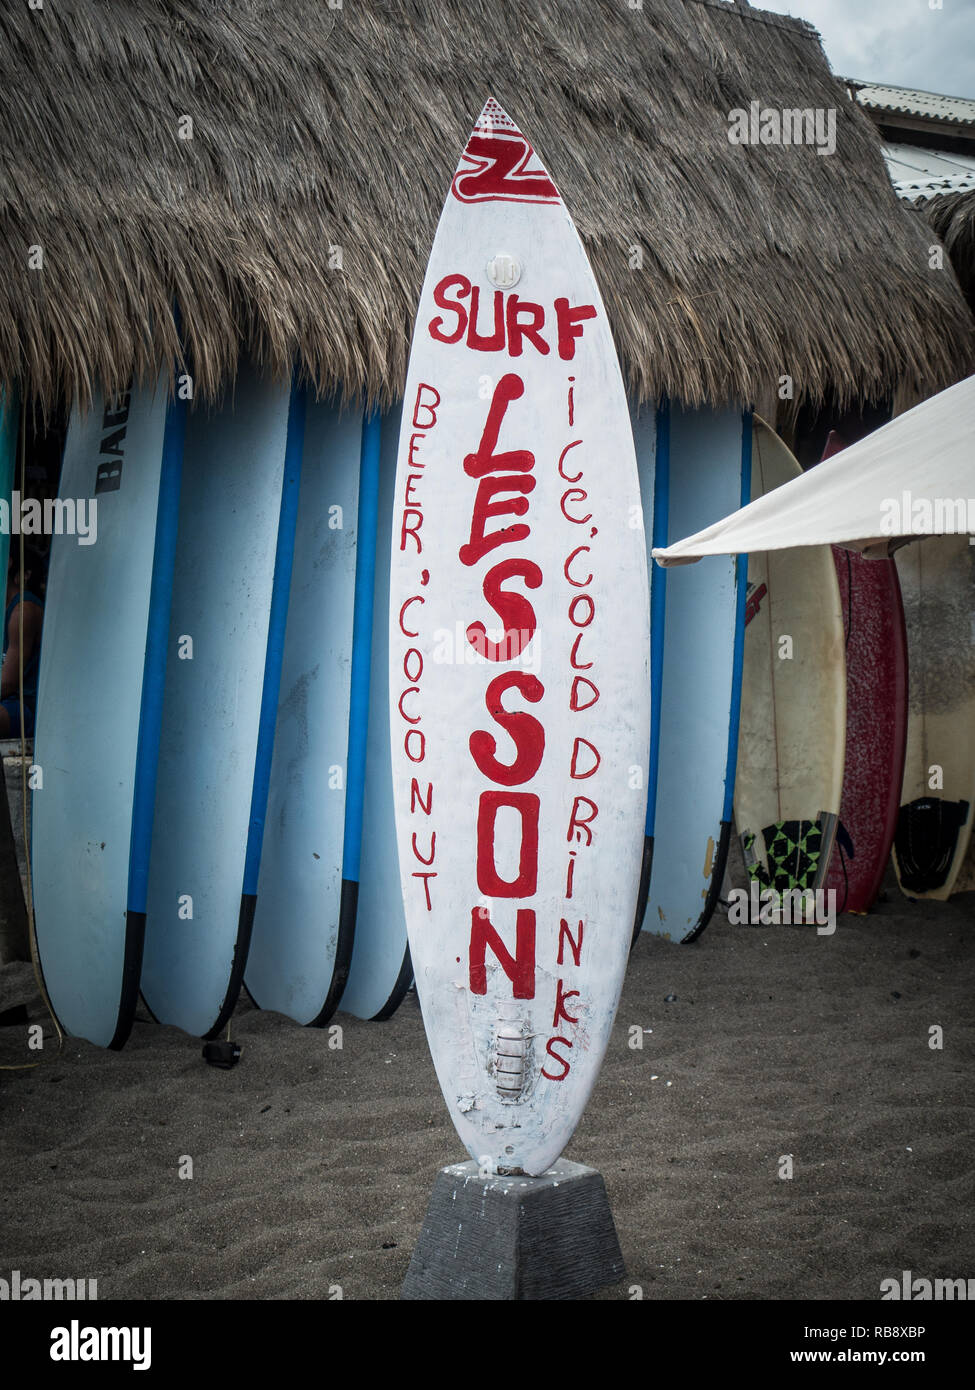 Surflessons in Surfers Beach in Canggu. Stockfoto